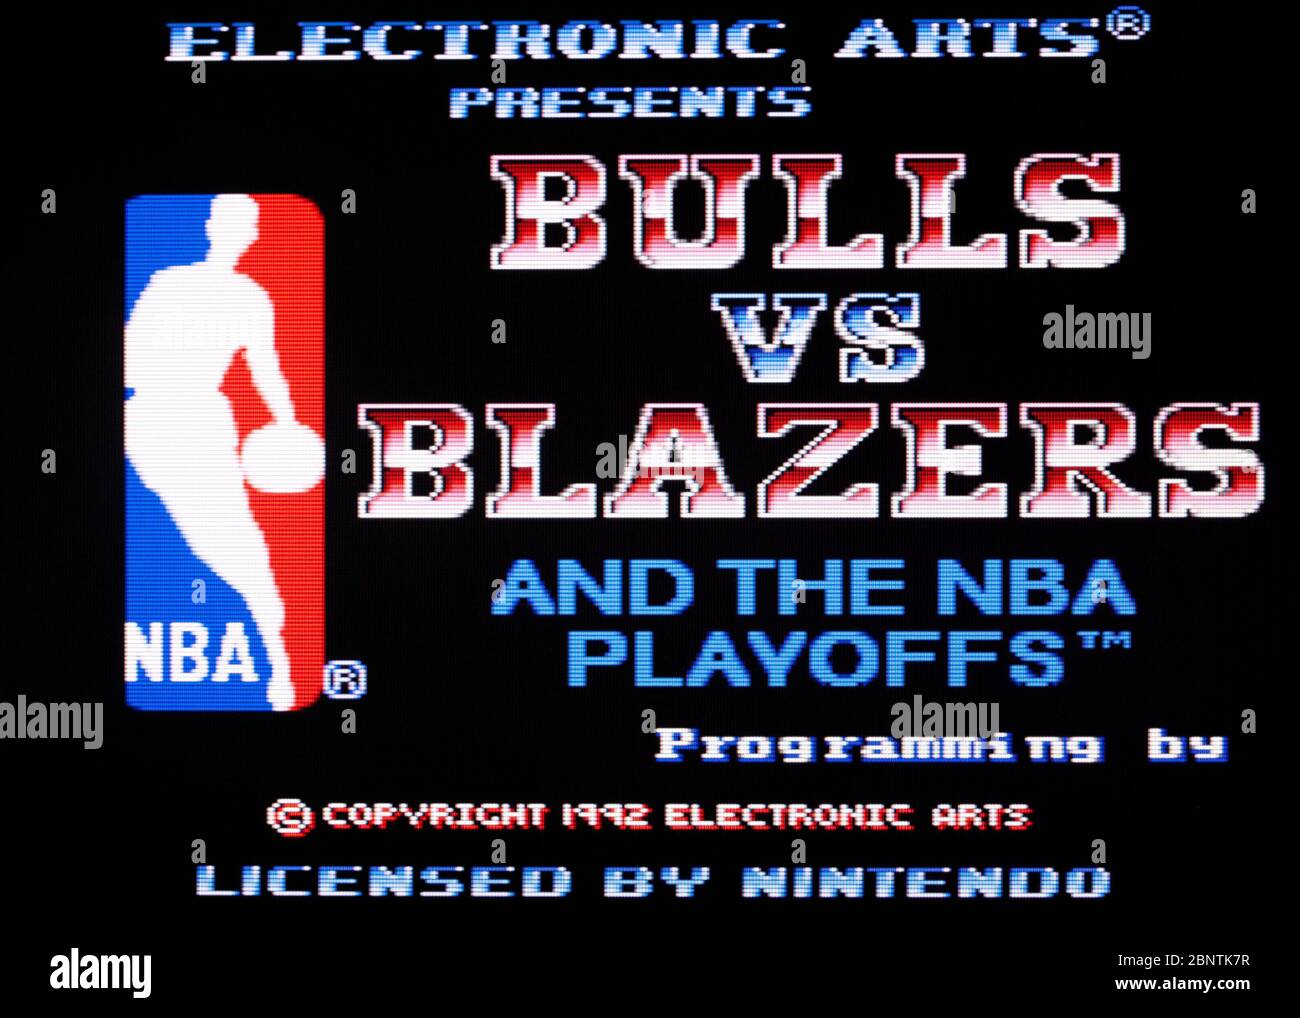 Bulls vs Blazers and the NBA Playoffs - SNES Super Nintendo  - Editorial use only Stock Photo